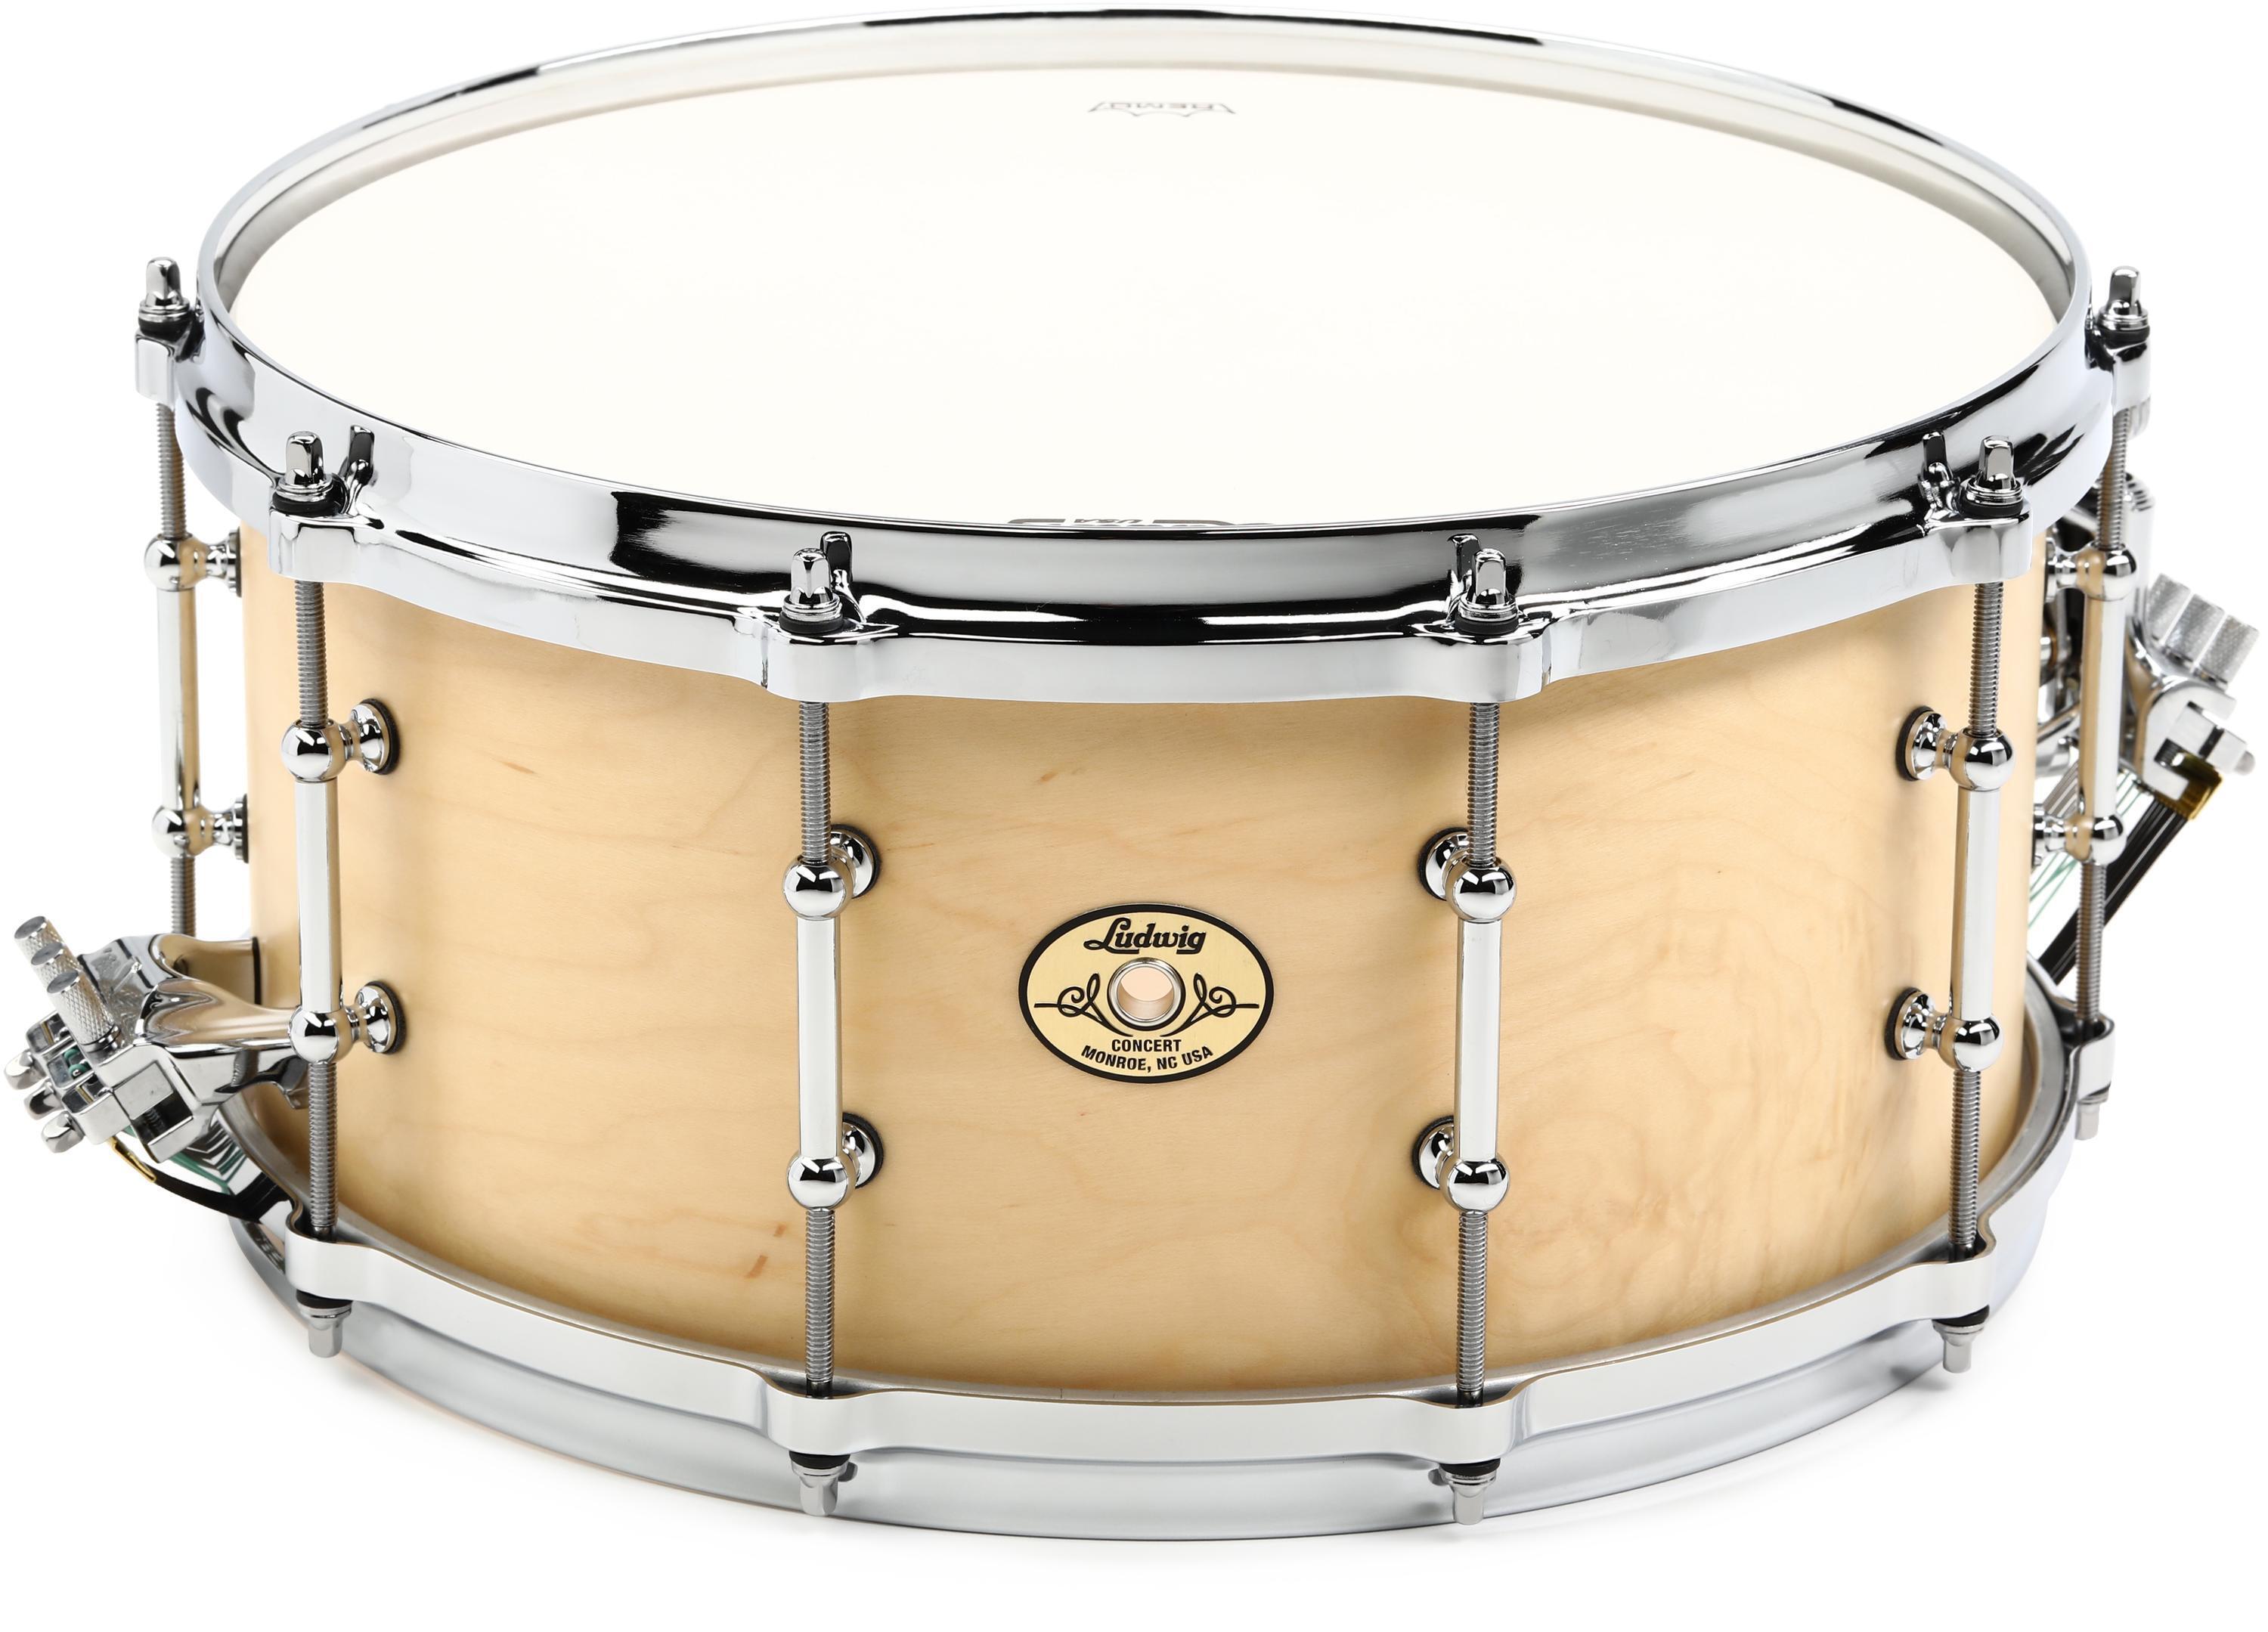 Ludwig Concert Maple Snare Drum - 6.5-inch x 14-inch, Satin Natural